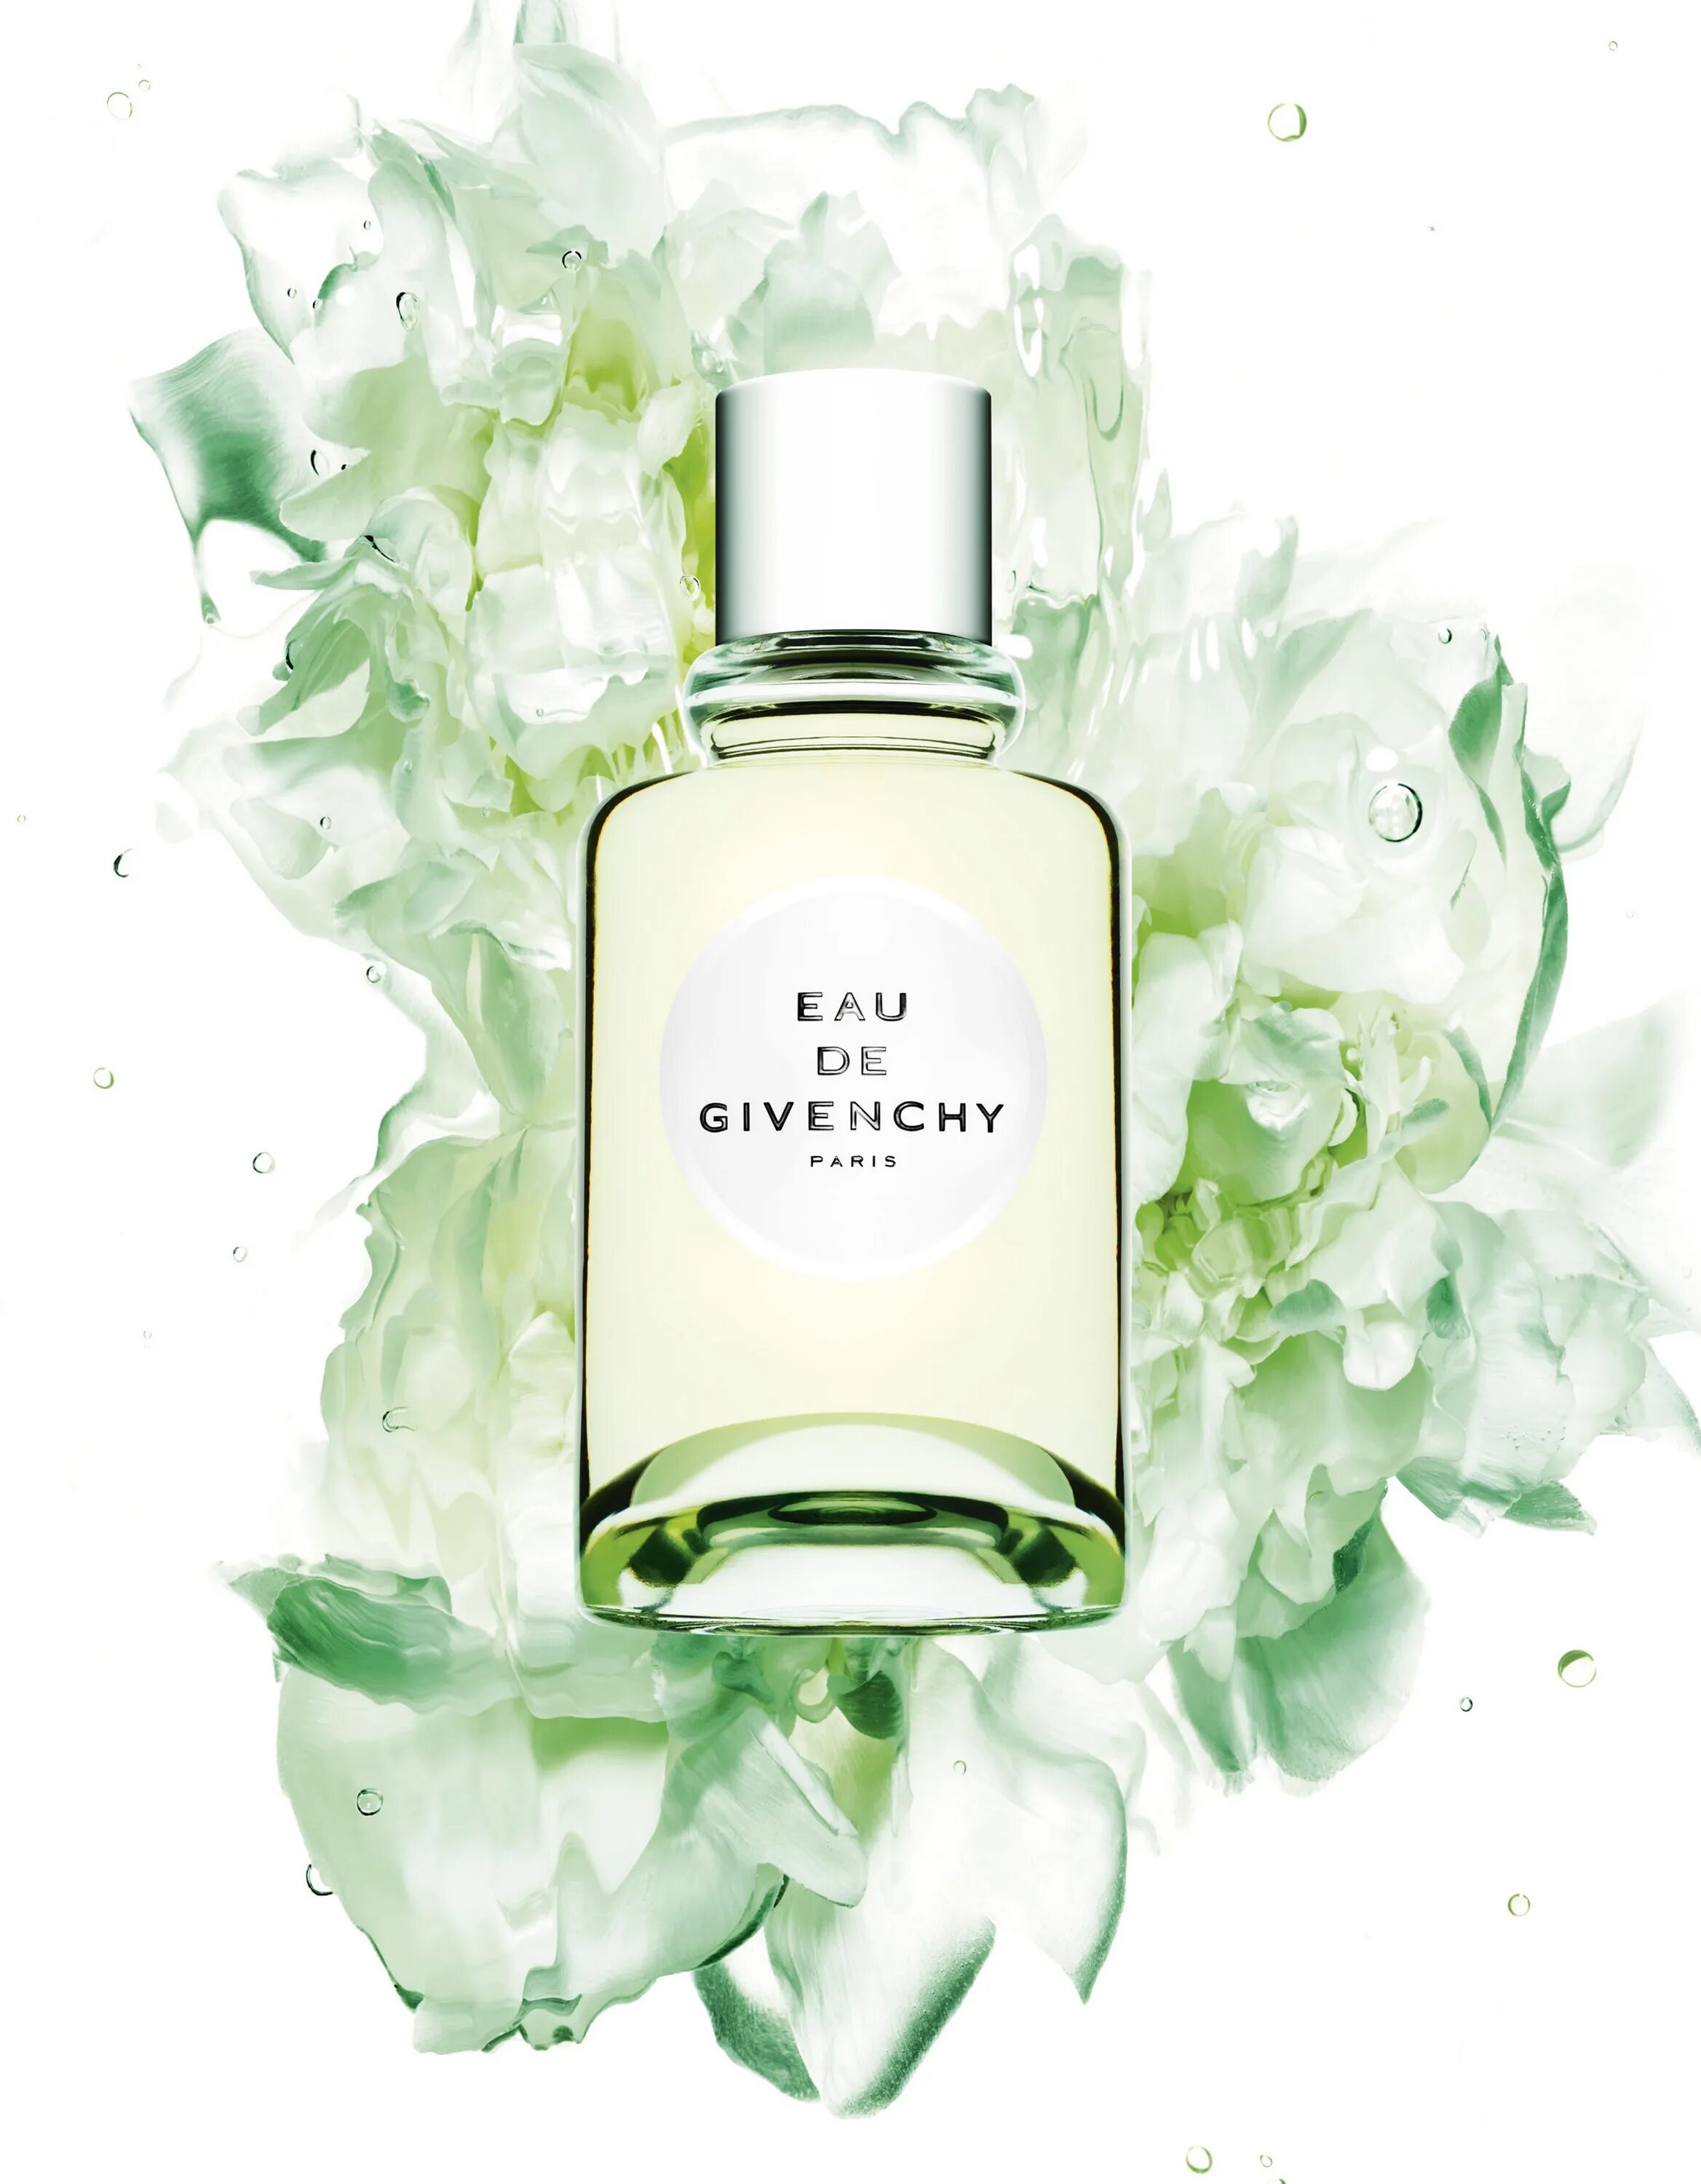 Givenchy Eau de Givenchy. Givenchy - Eau de Givenchy 2018. Eau de Givenchy от Givenchy. Givenchy Eau de Givenchy EDT 100 ml Tester w.